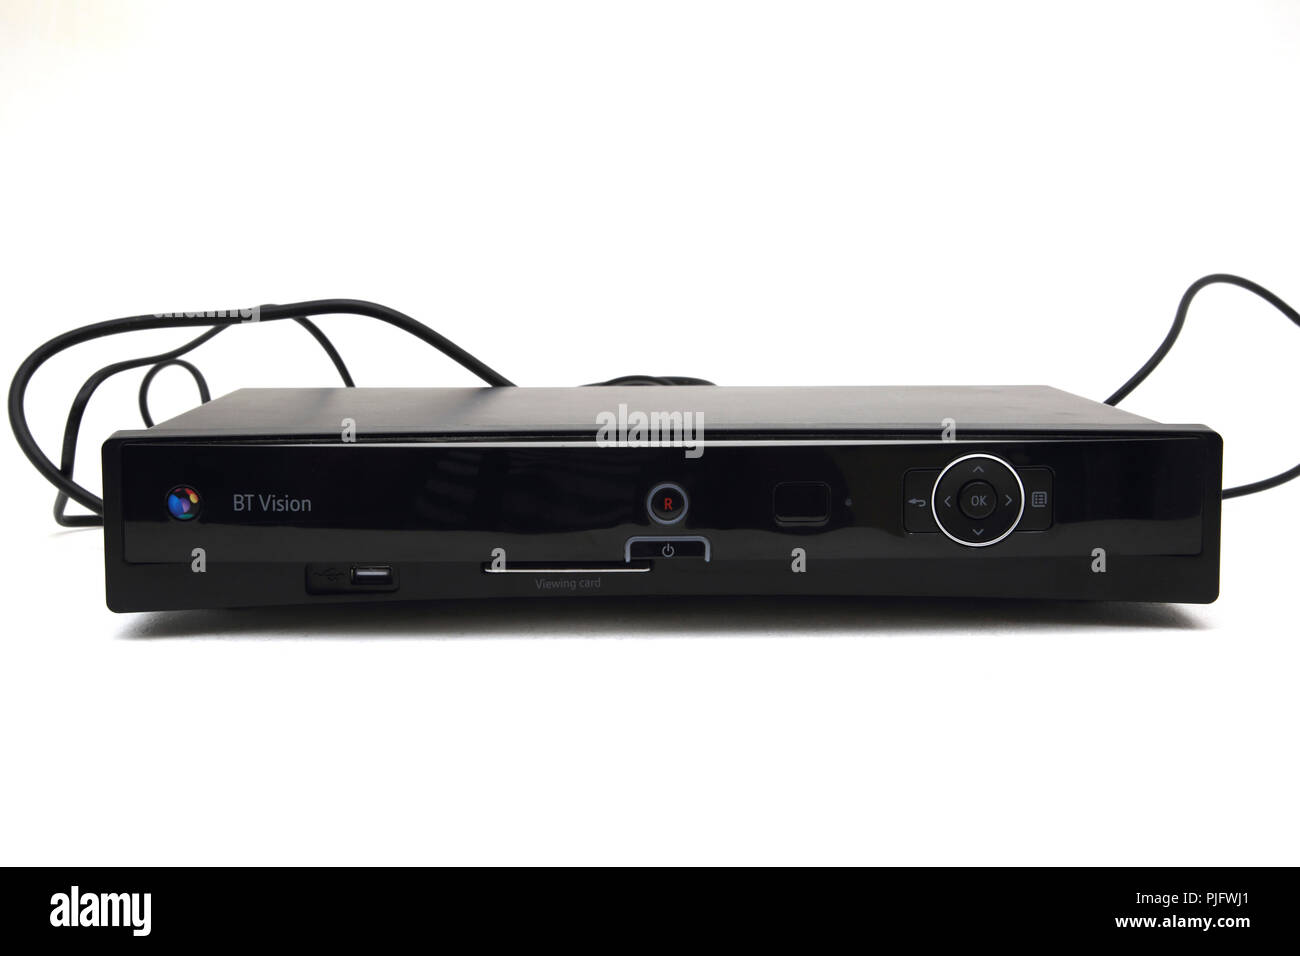 BT Vision Set top Box and Digital Recorder with Viewing Card Slot Stock Photo